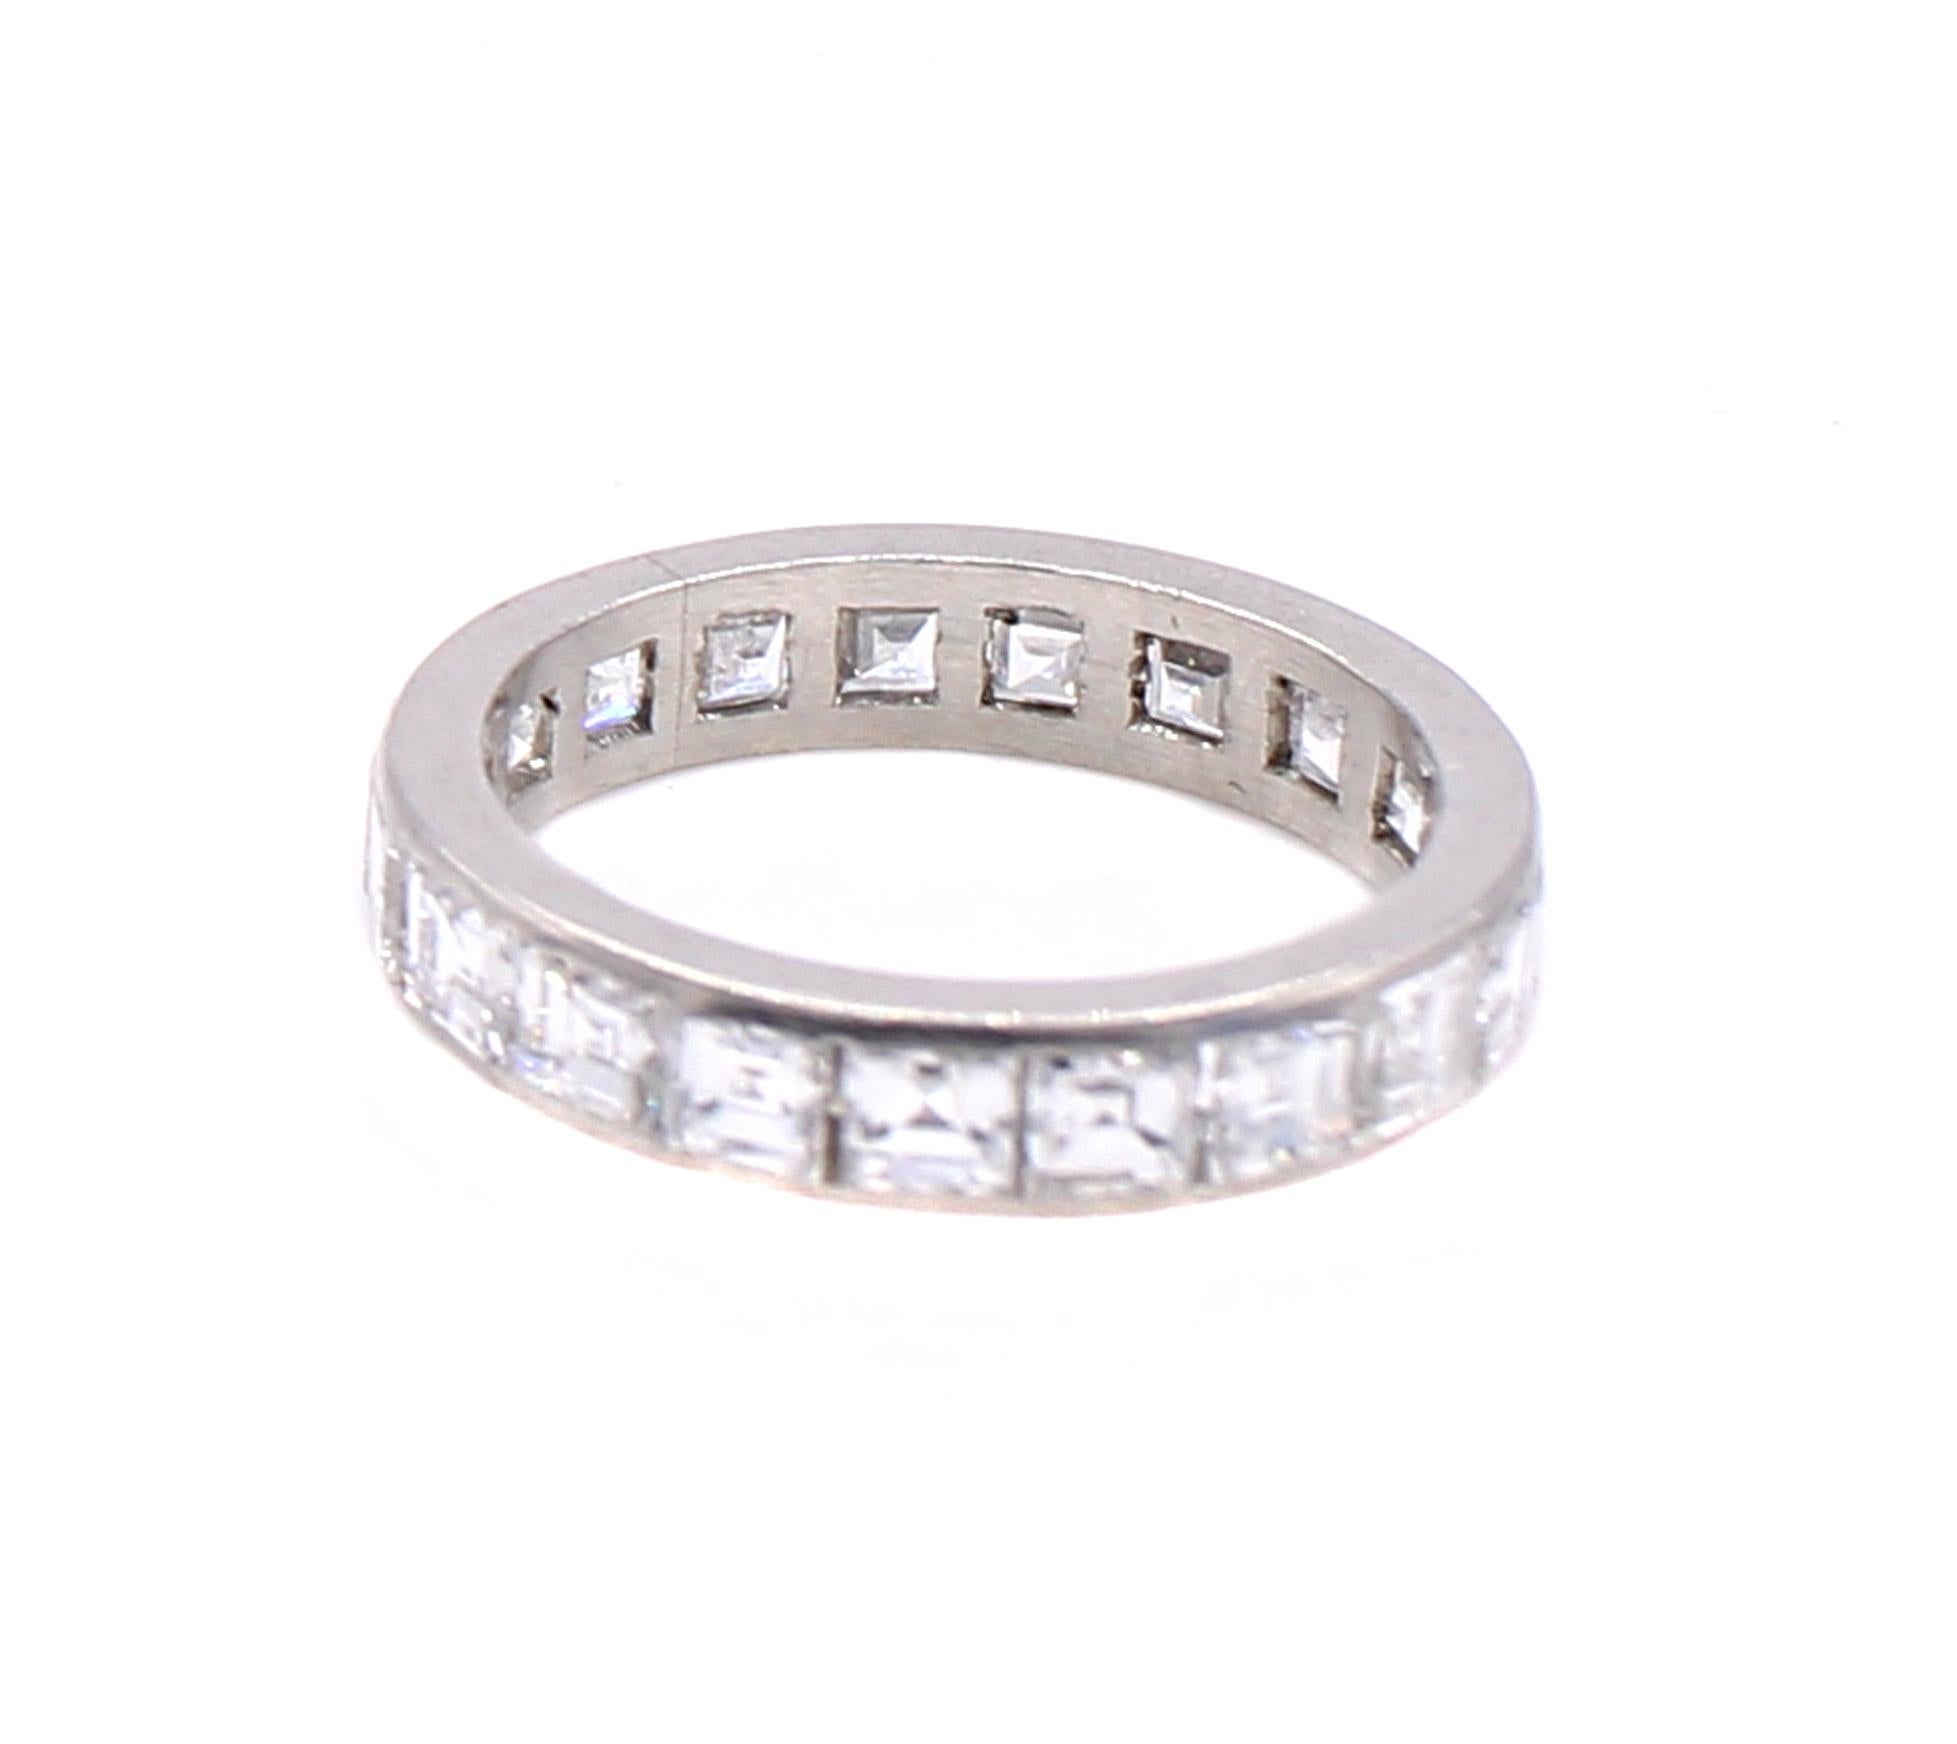 Beautifully hand crafted in platinum this Art Deco eternity band from ca 1930 is channel set with 19 perfectly matched bright white and lively square step cut diamonds The approximate total diamond weight is 3.90 carats with an average color of F-G